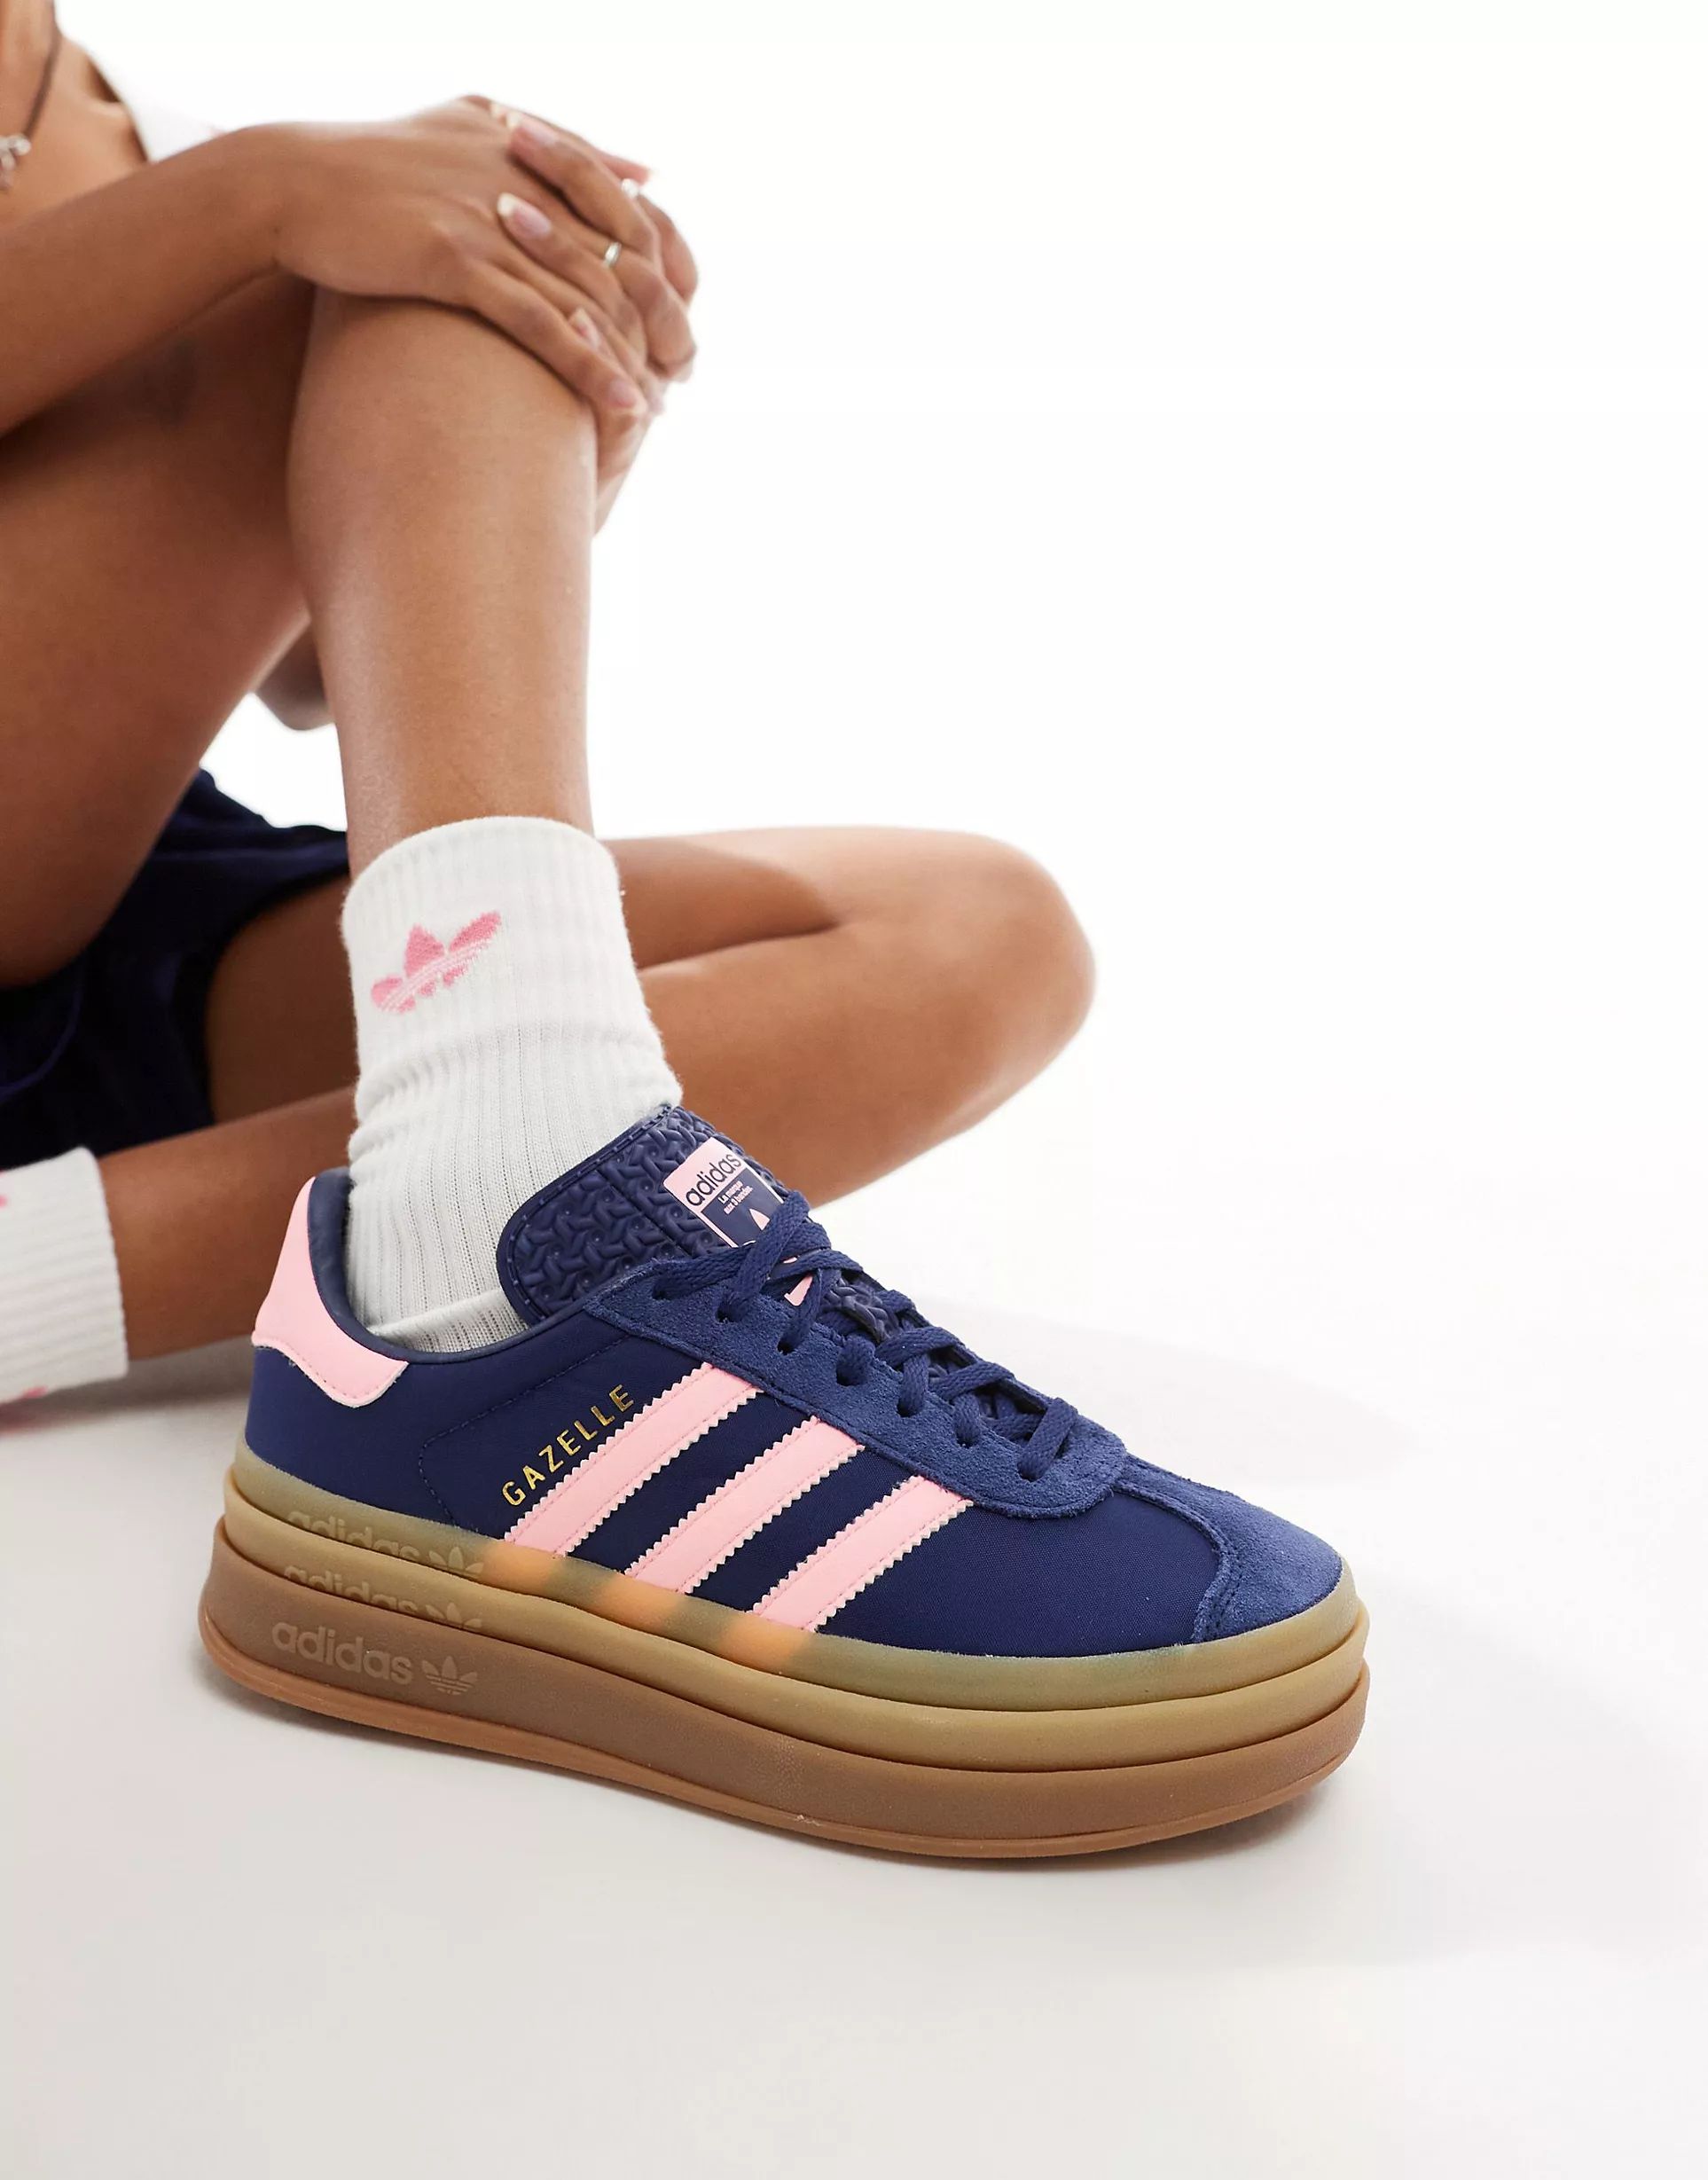 adidas Originals Gazelle Bold sneakers in navy and pink | ASOS (Global)